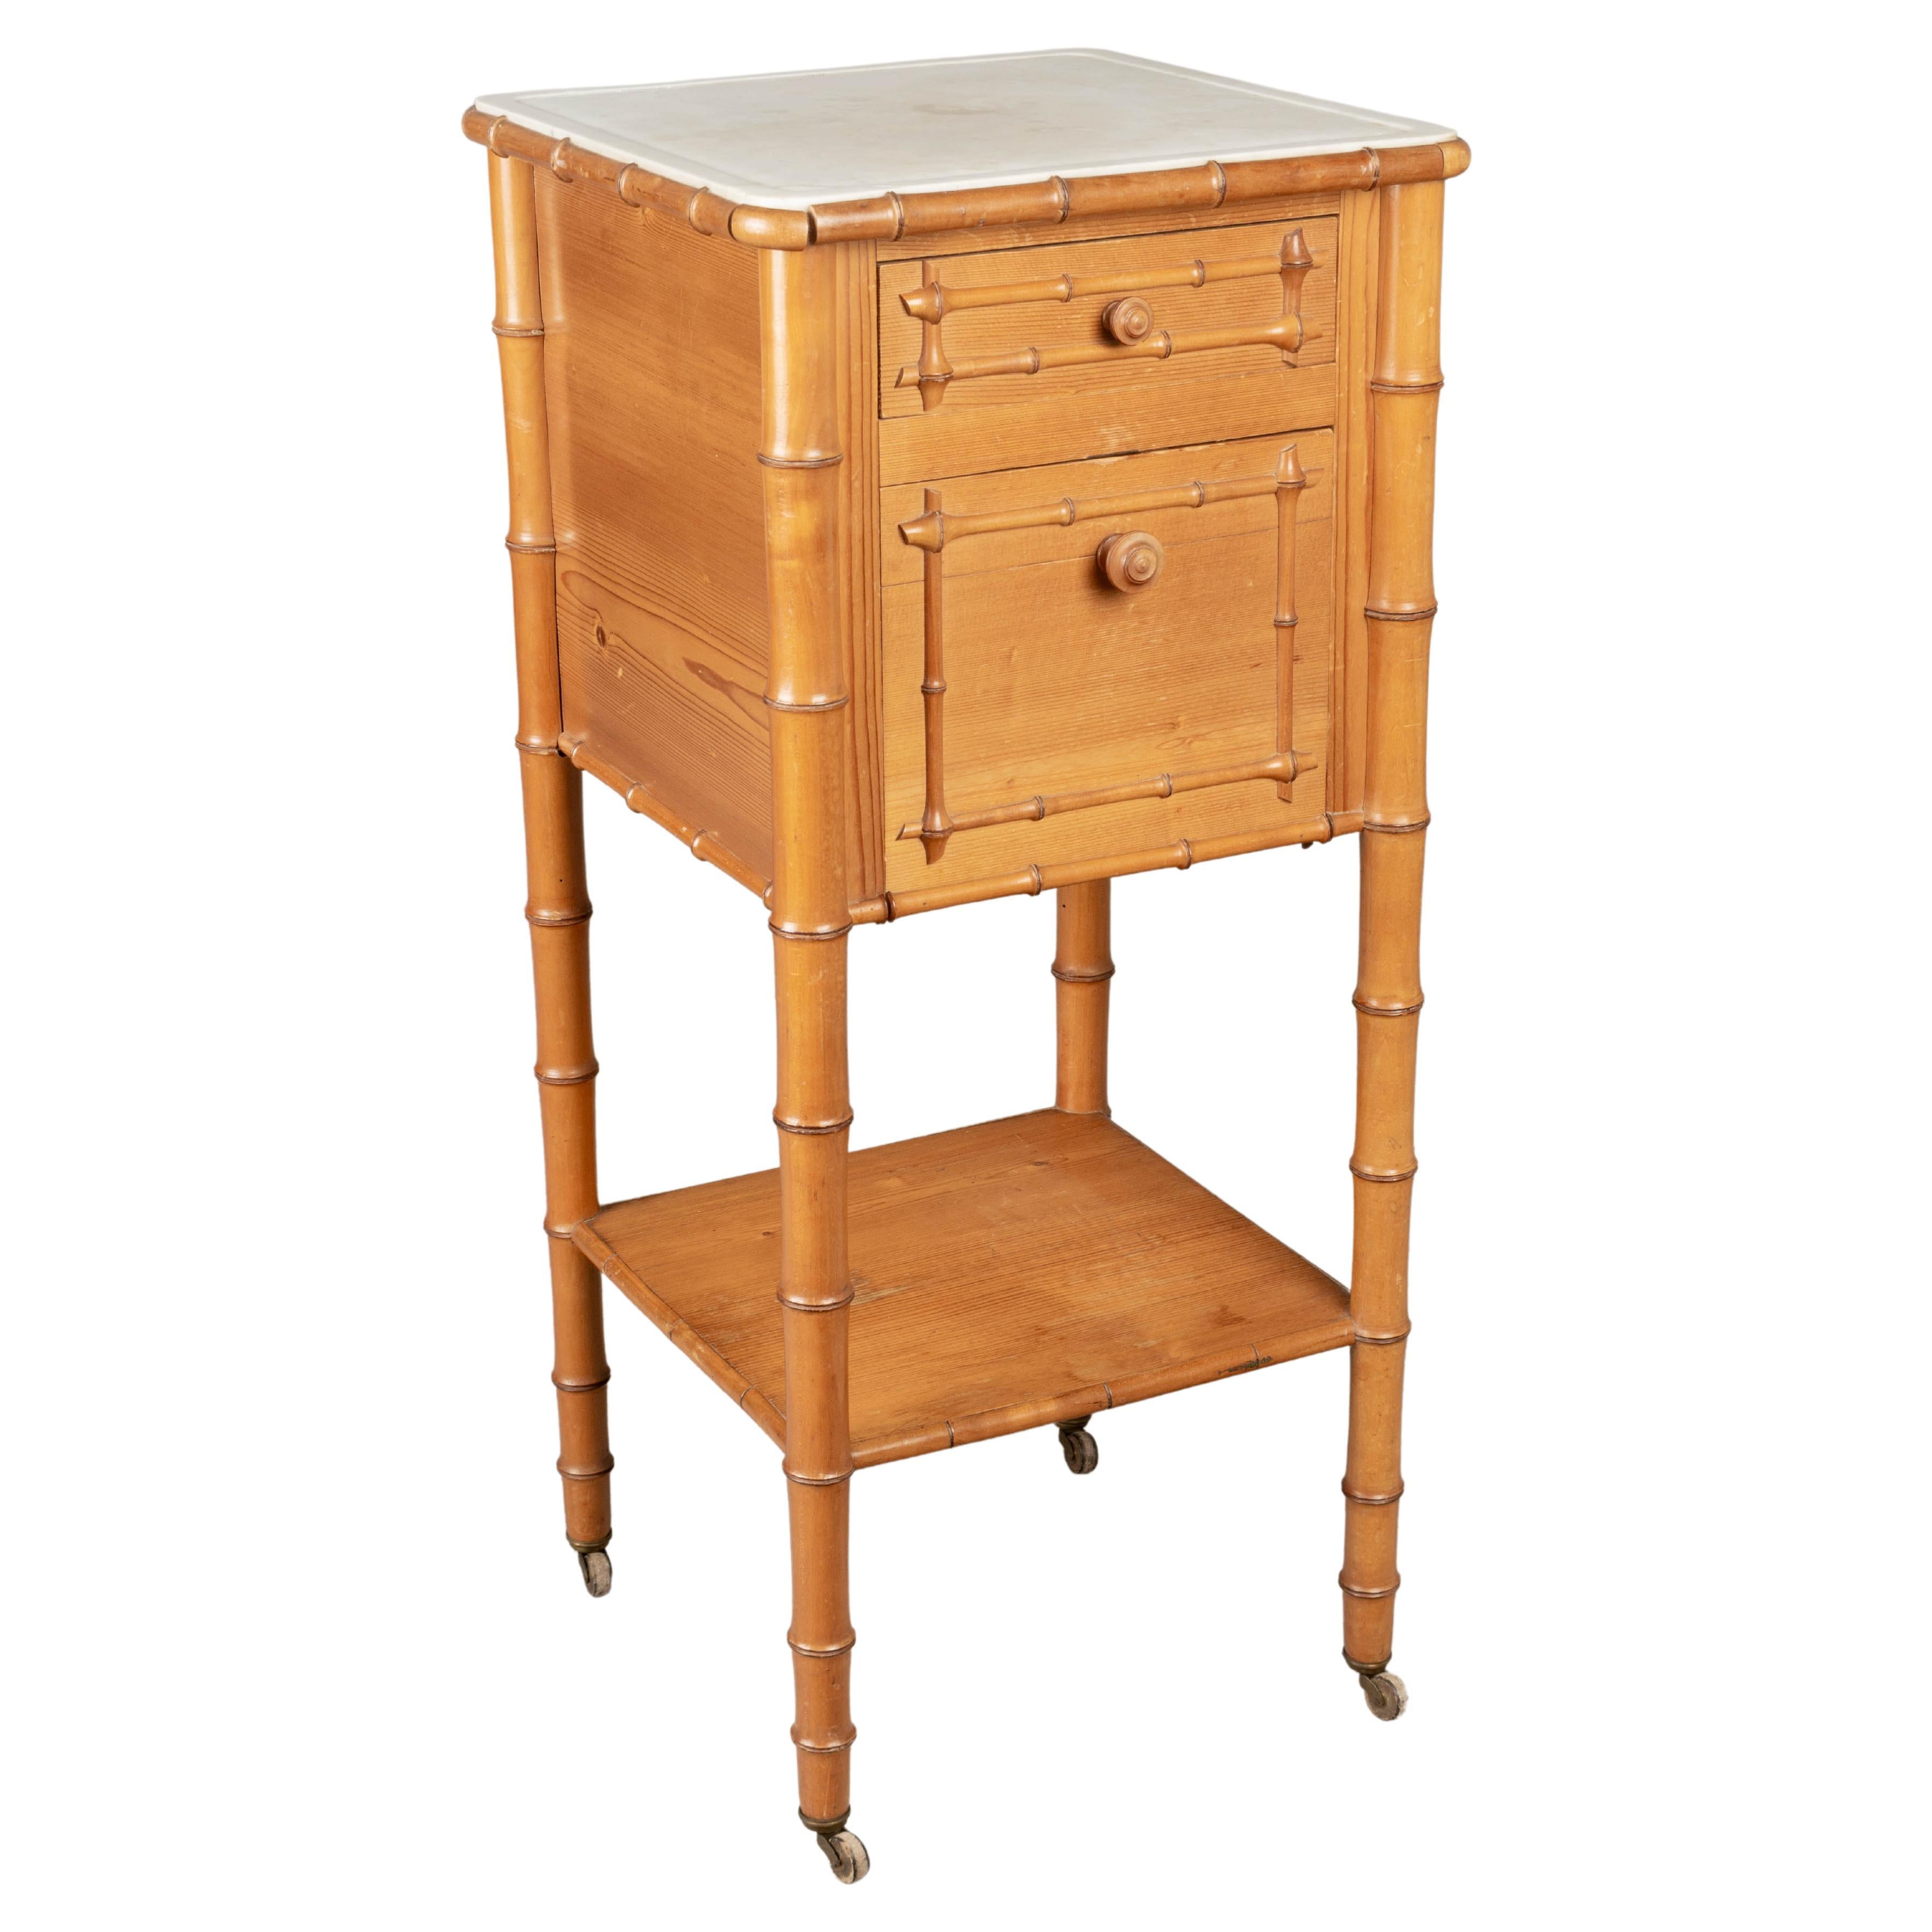 French Faux Bamboo Nightstand or Side Table